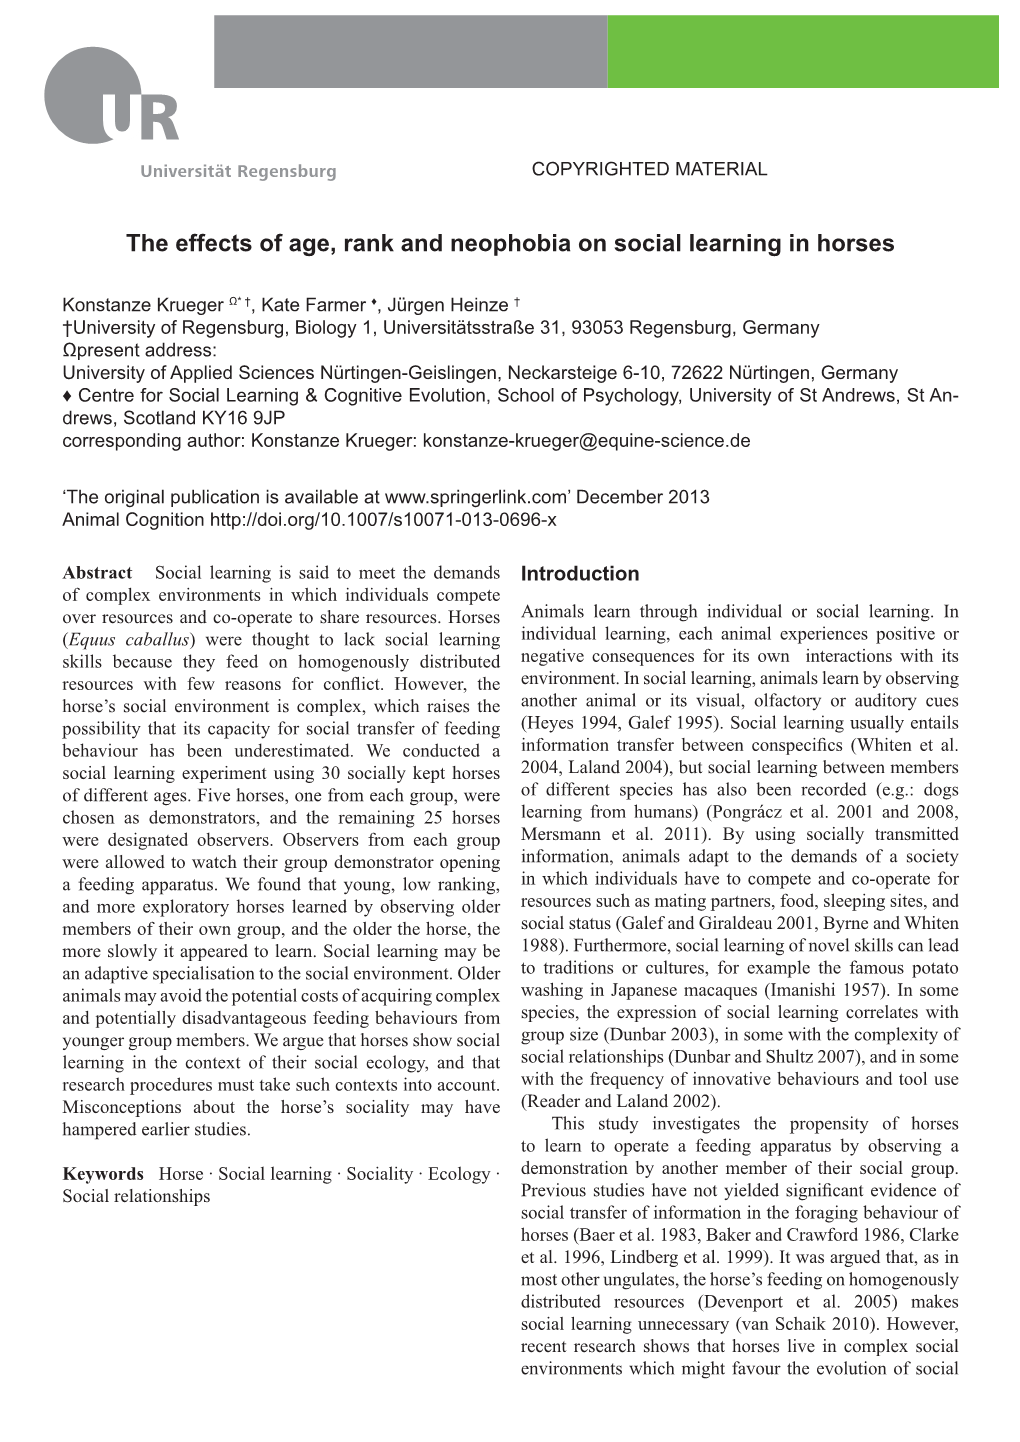 The Effects of Age, Rank and Neophobia on Social Learning in Horses